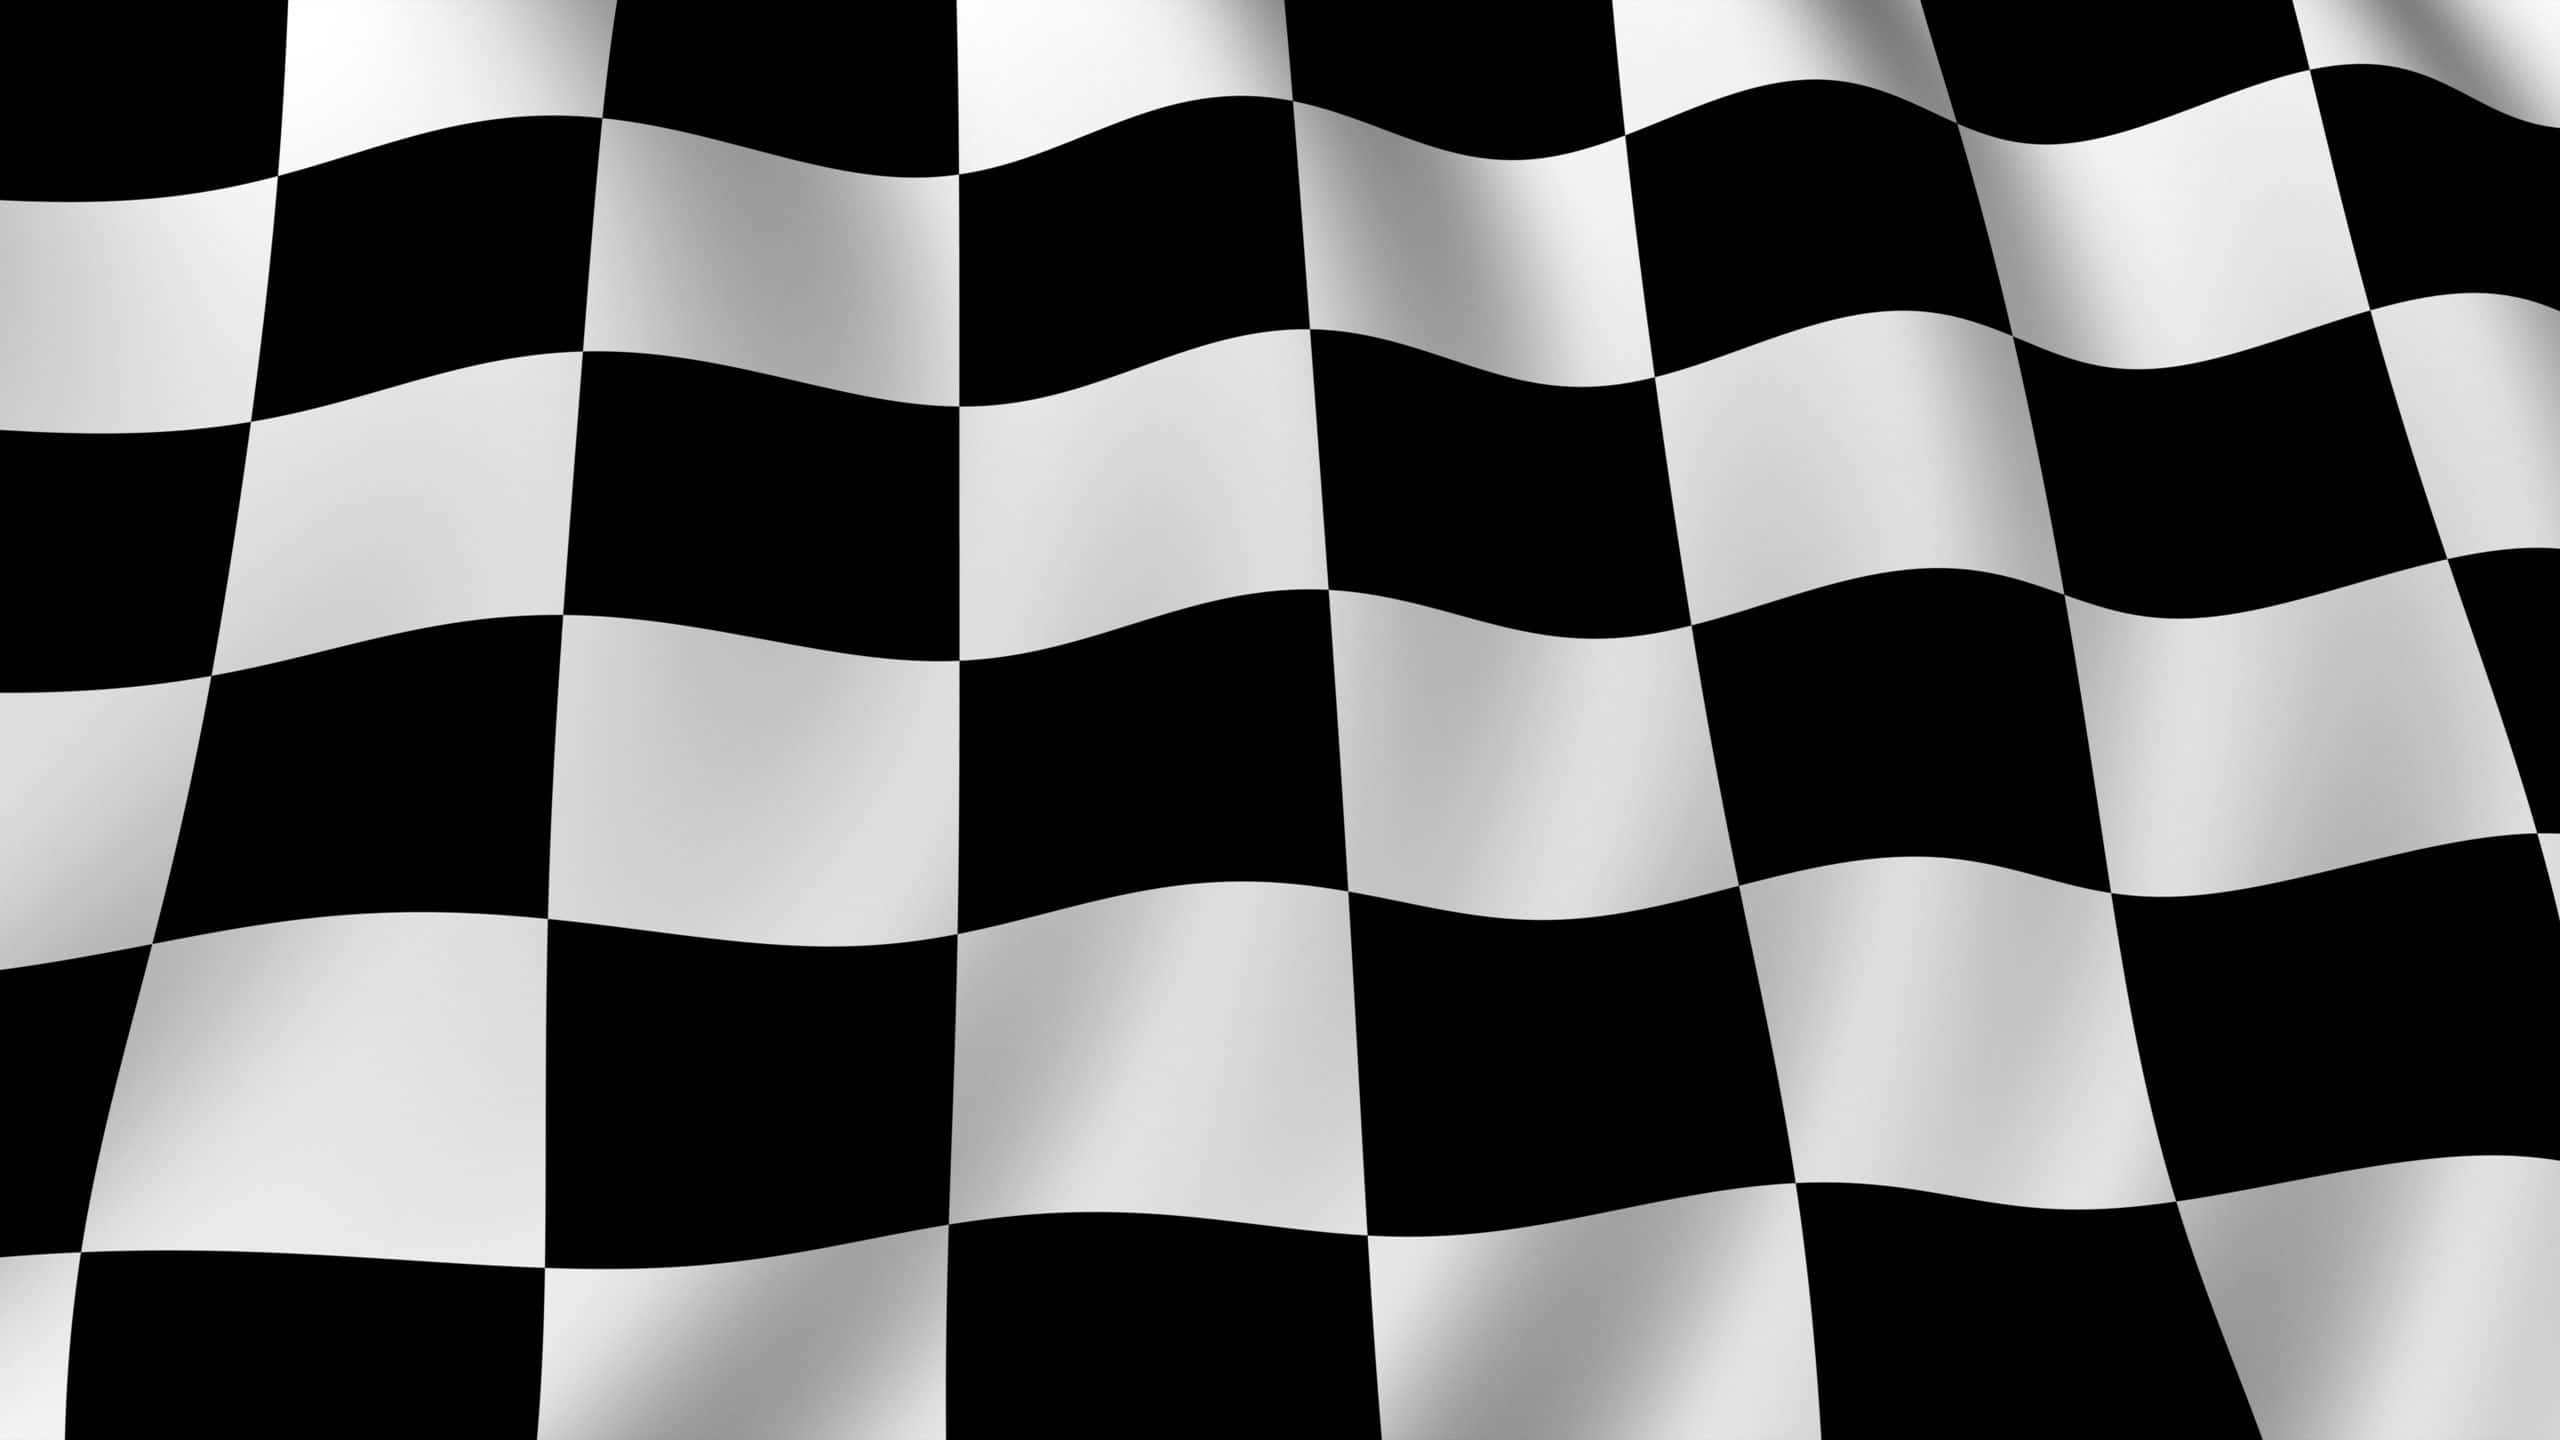 Cross the finishing line with a checkered flag